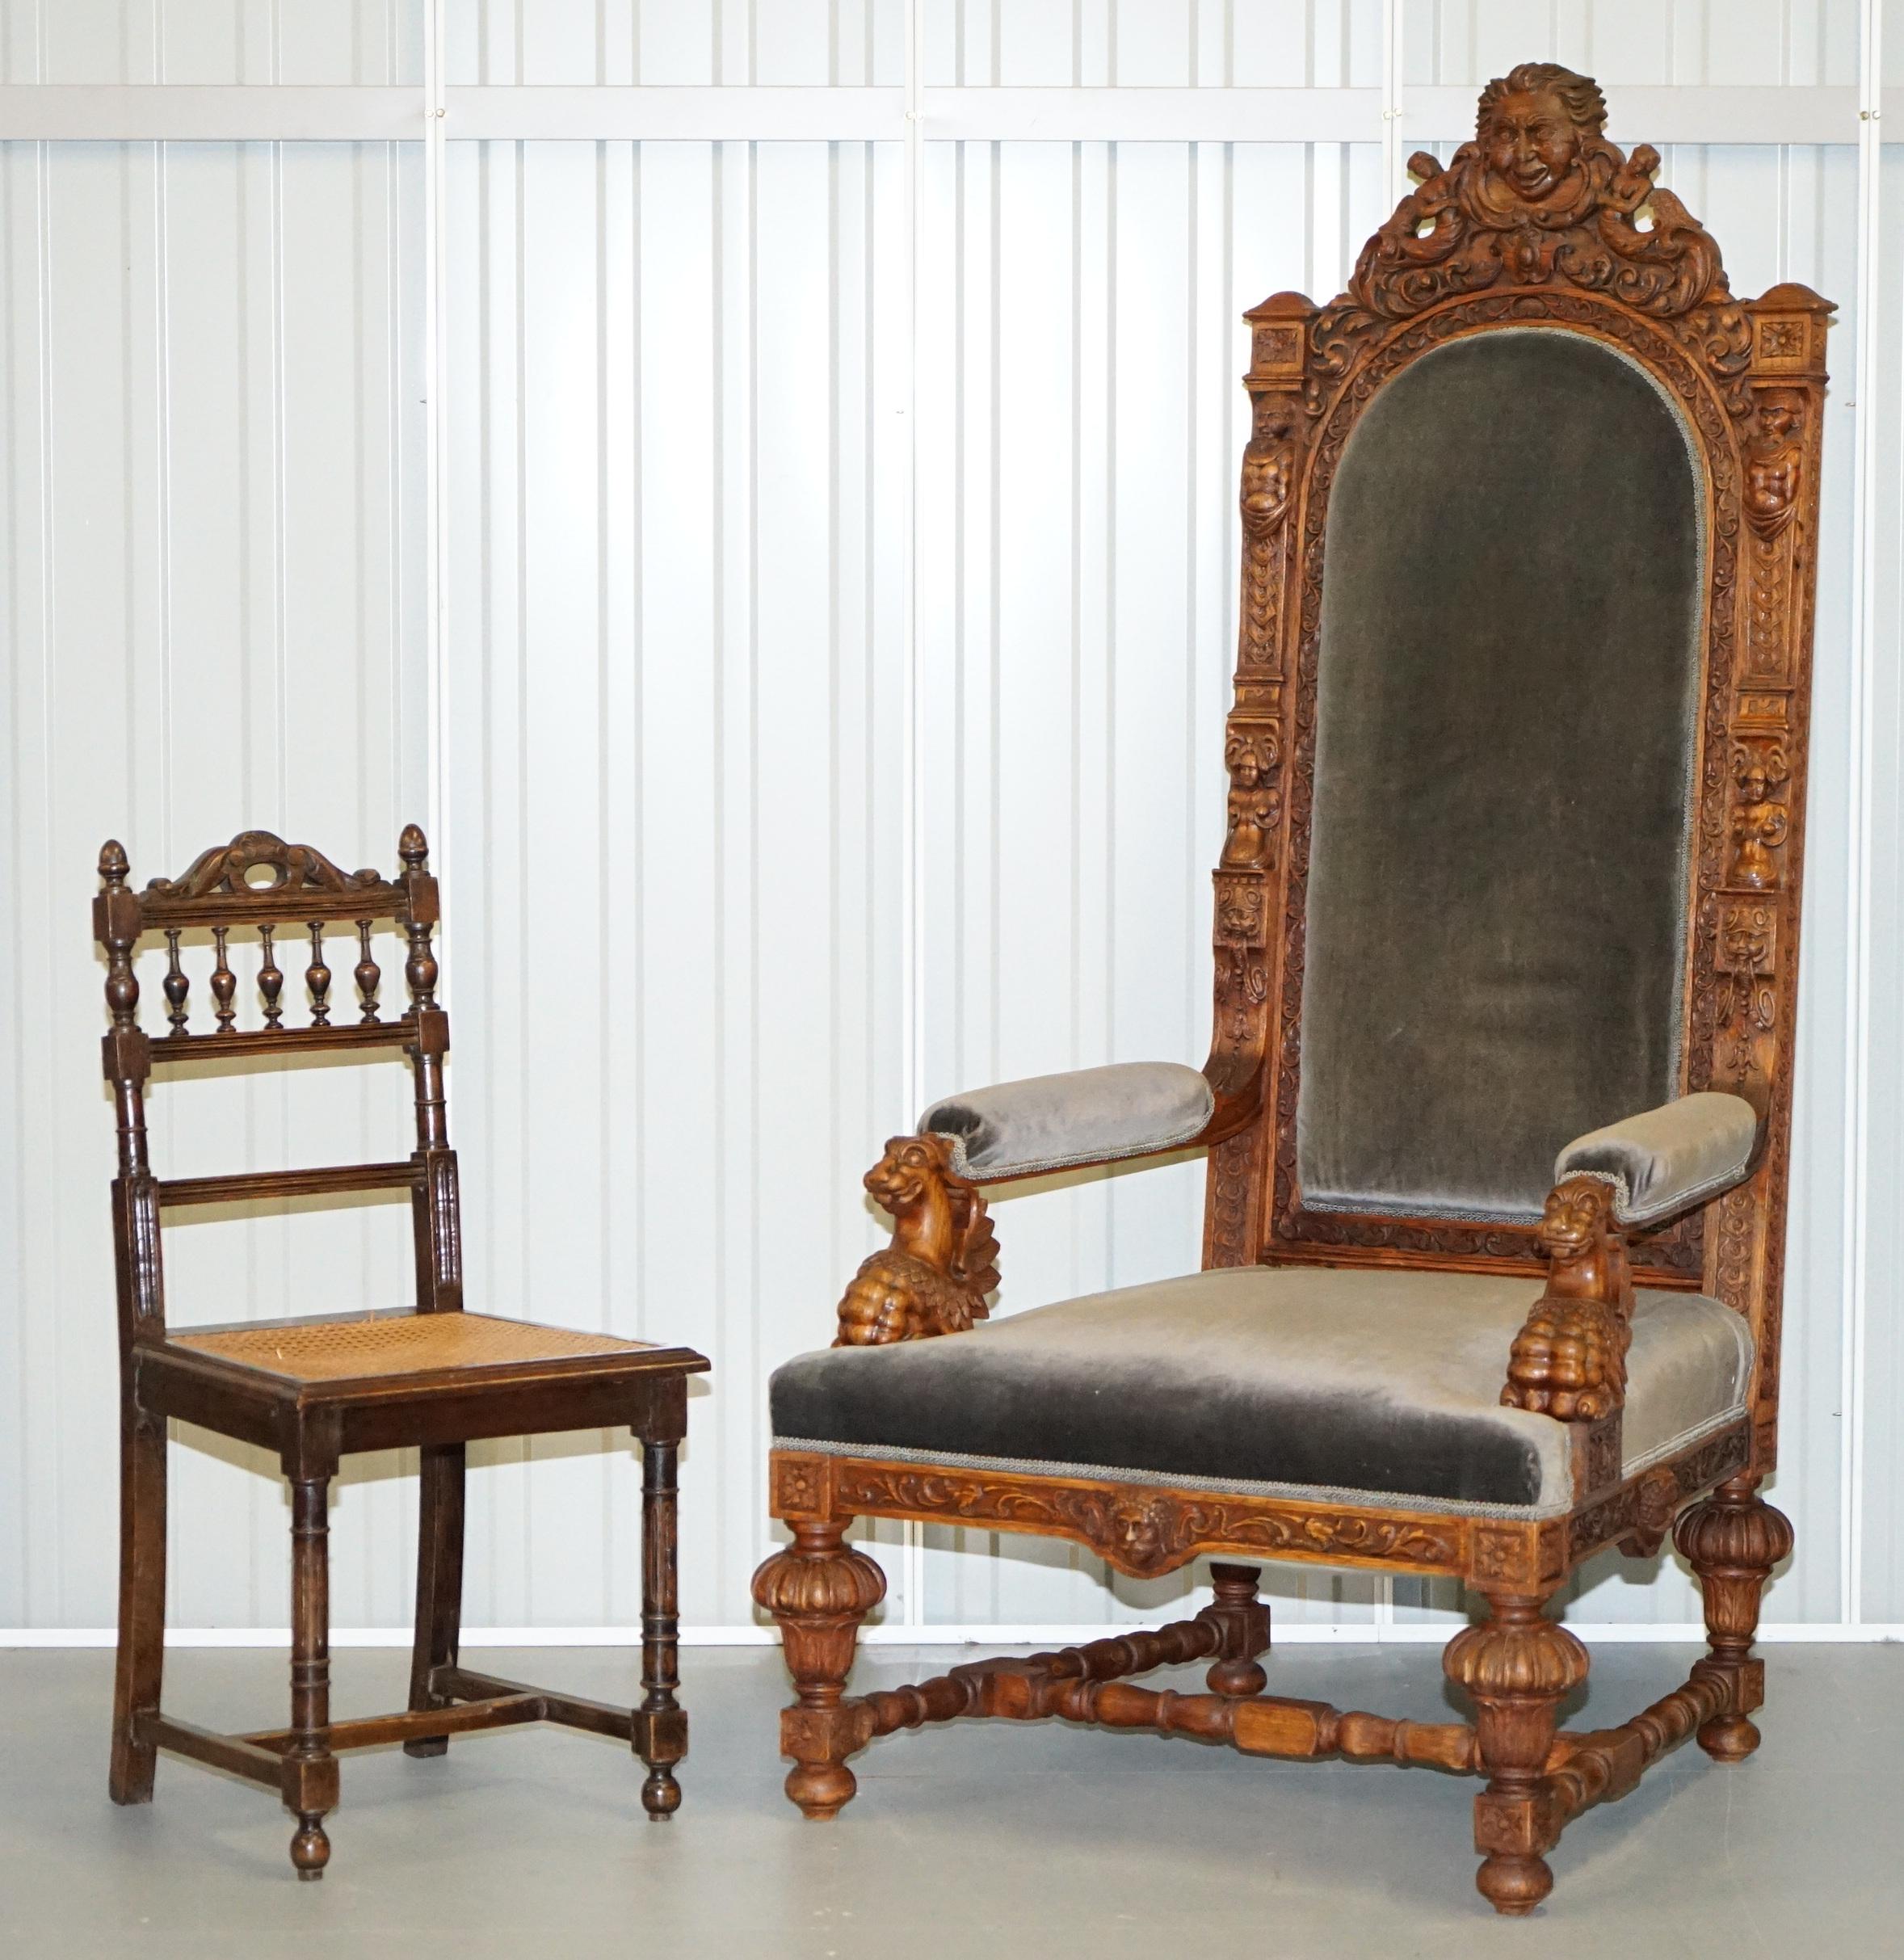 We are delighted to offer for sale this pair of absolutely enormous Jacobean revival Victorian hand carved English oak throne armchairs 

A very decorative and well made pair, hand carved from solid slabs of English oak, the top crests depict